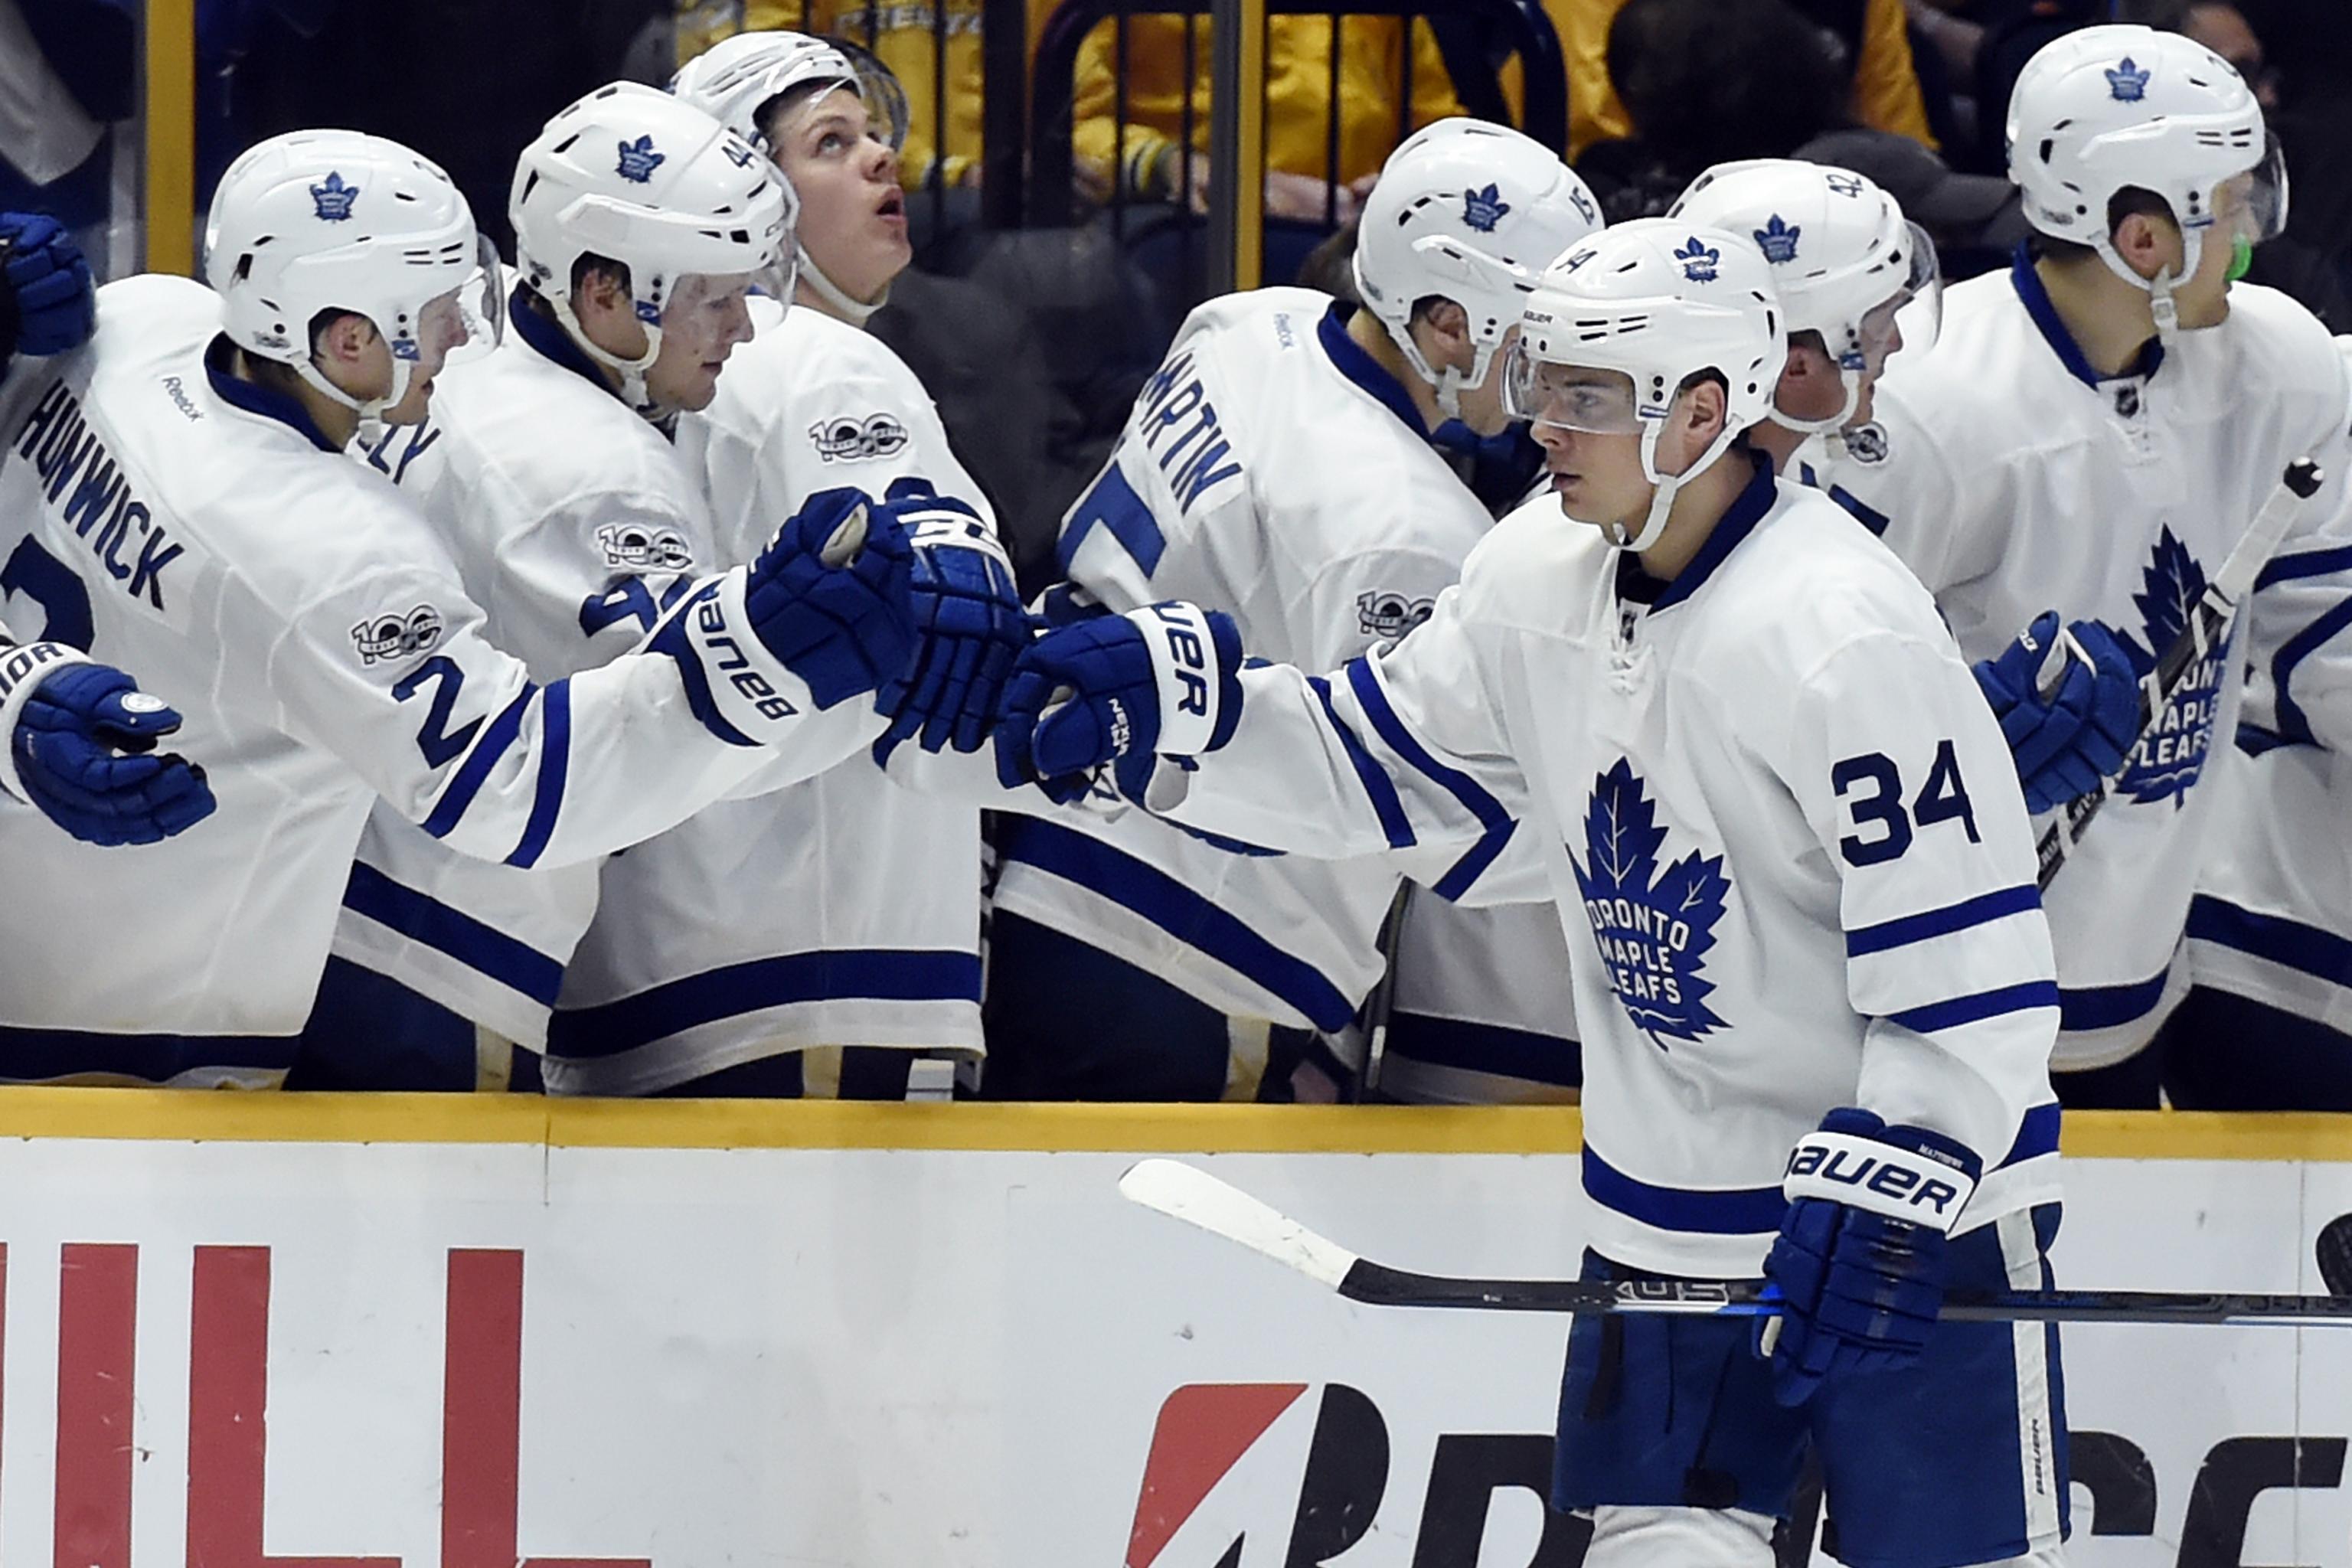 Toronto upset with Drake after Maple Leafs lose to Bruins